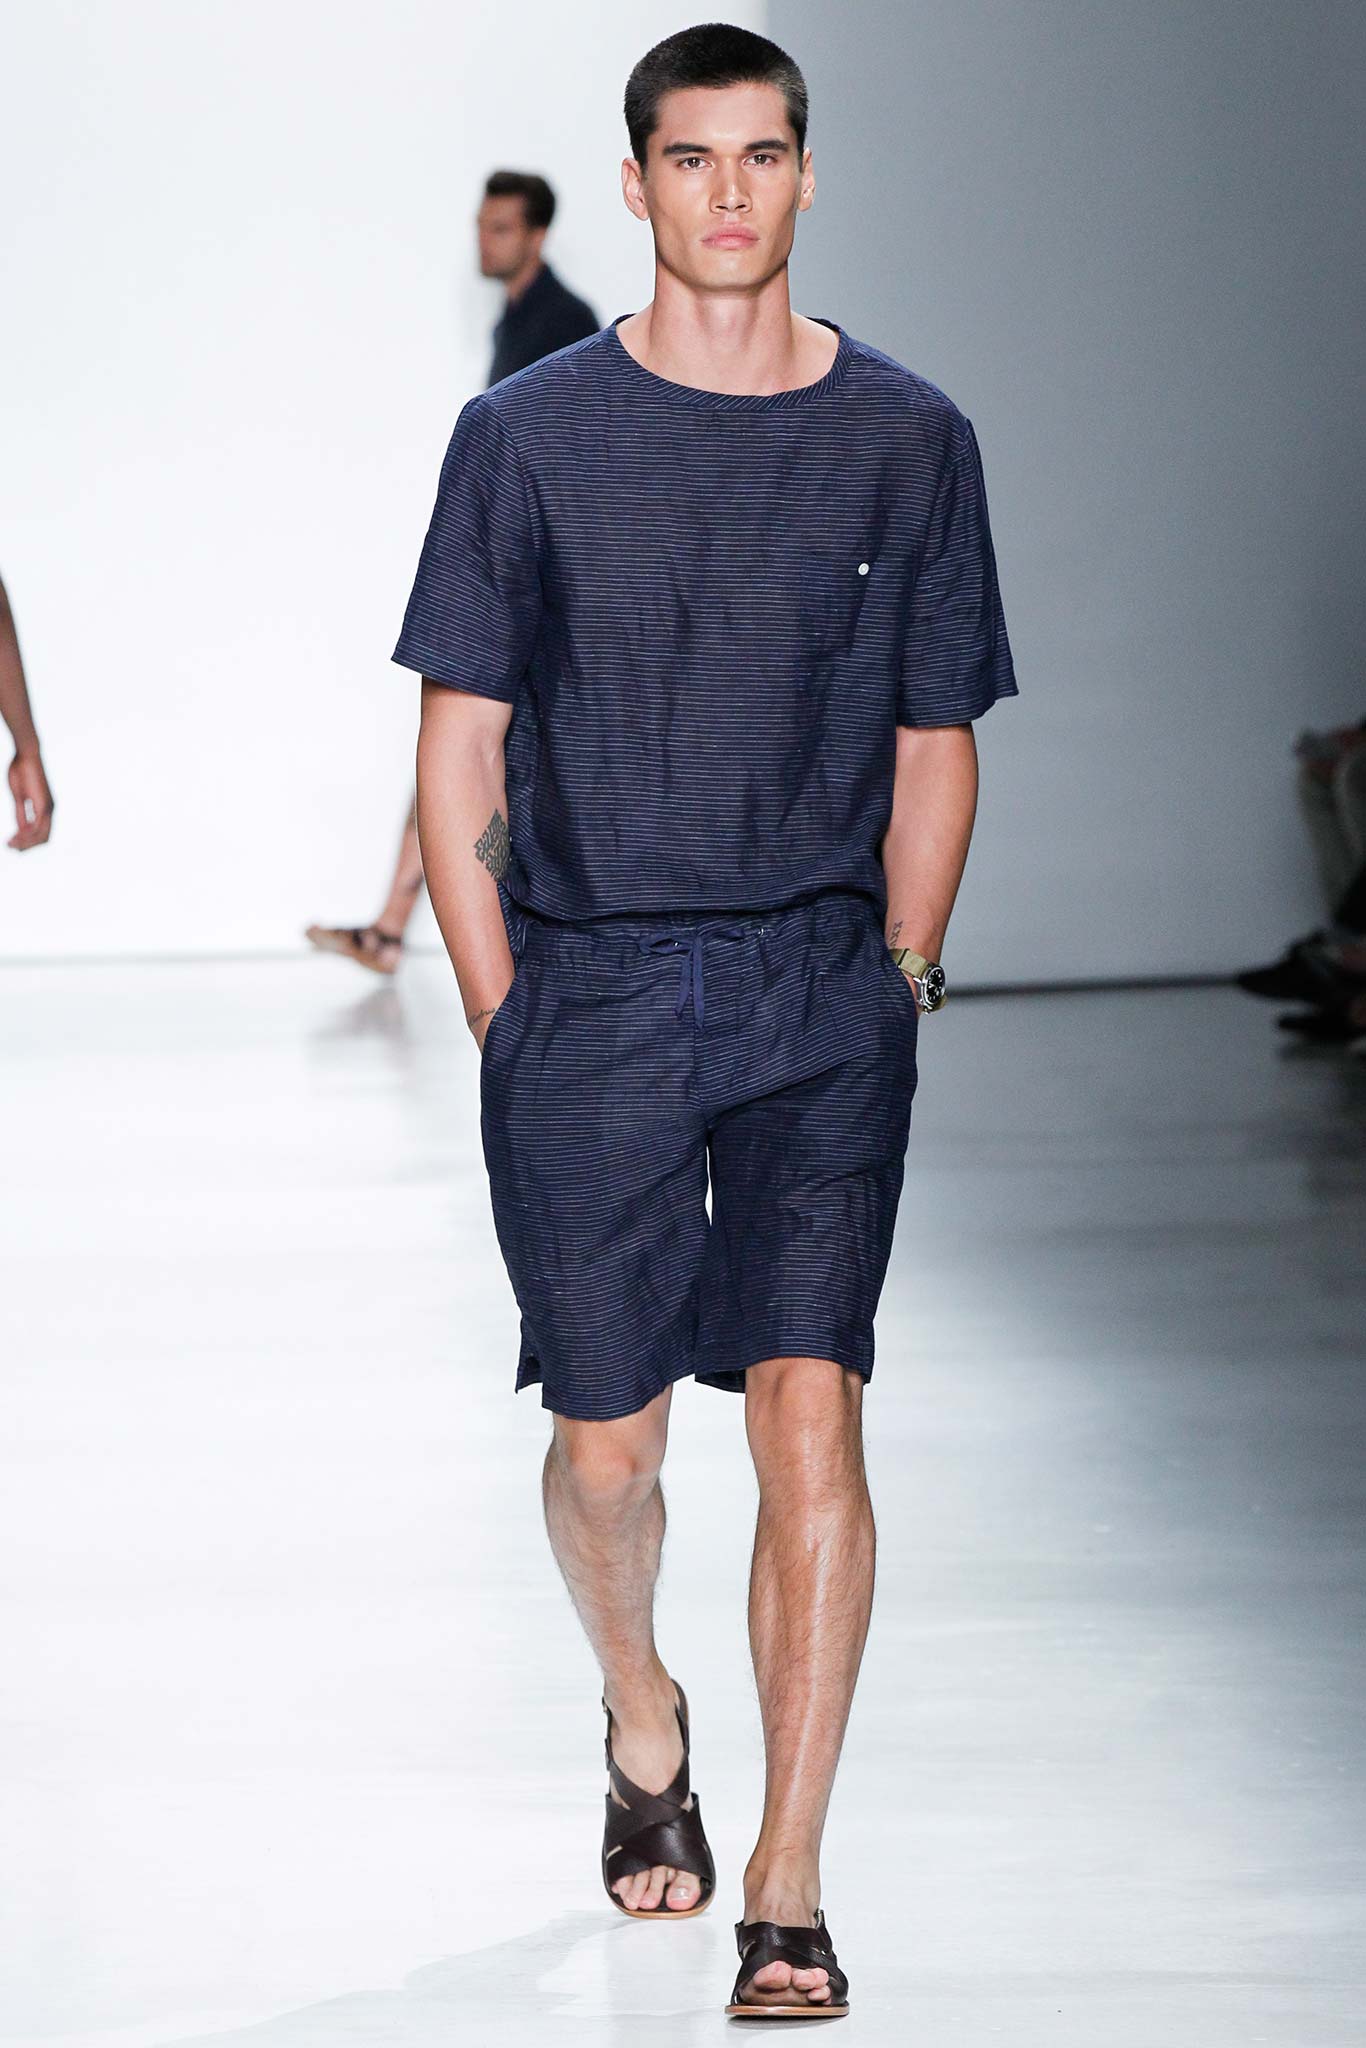 Todd Snyder S/S 16 Show @ToddSnyderNY #NYFWM | Marcus Troy